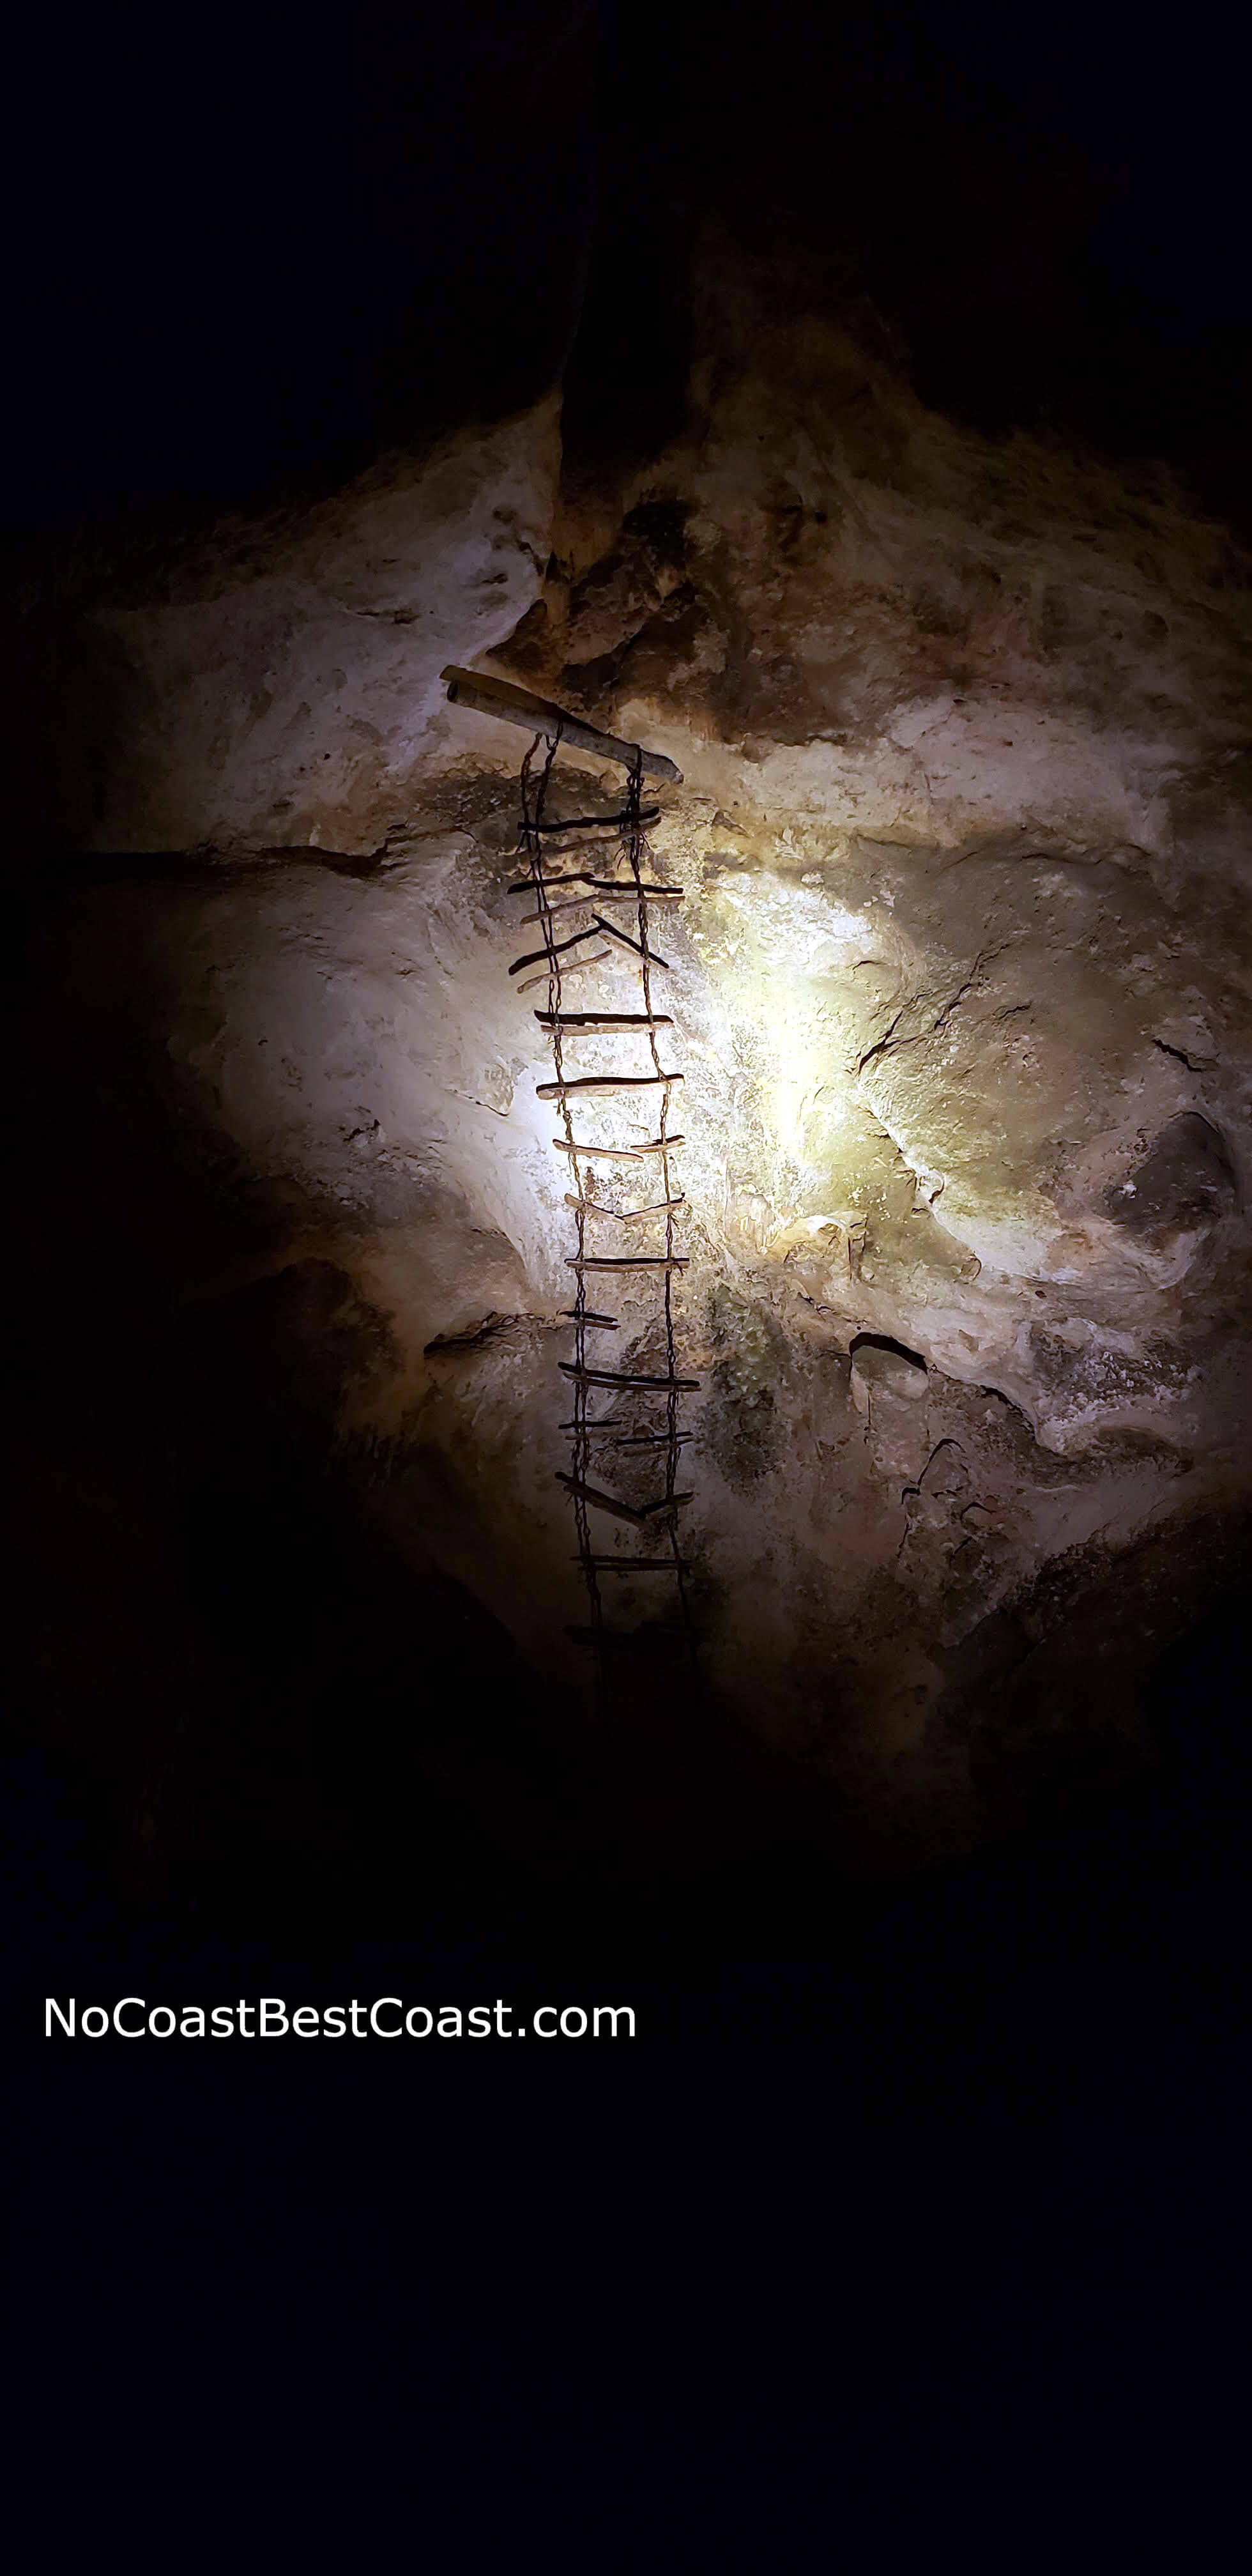 An old rope ladder used by early cave explorers